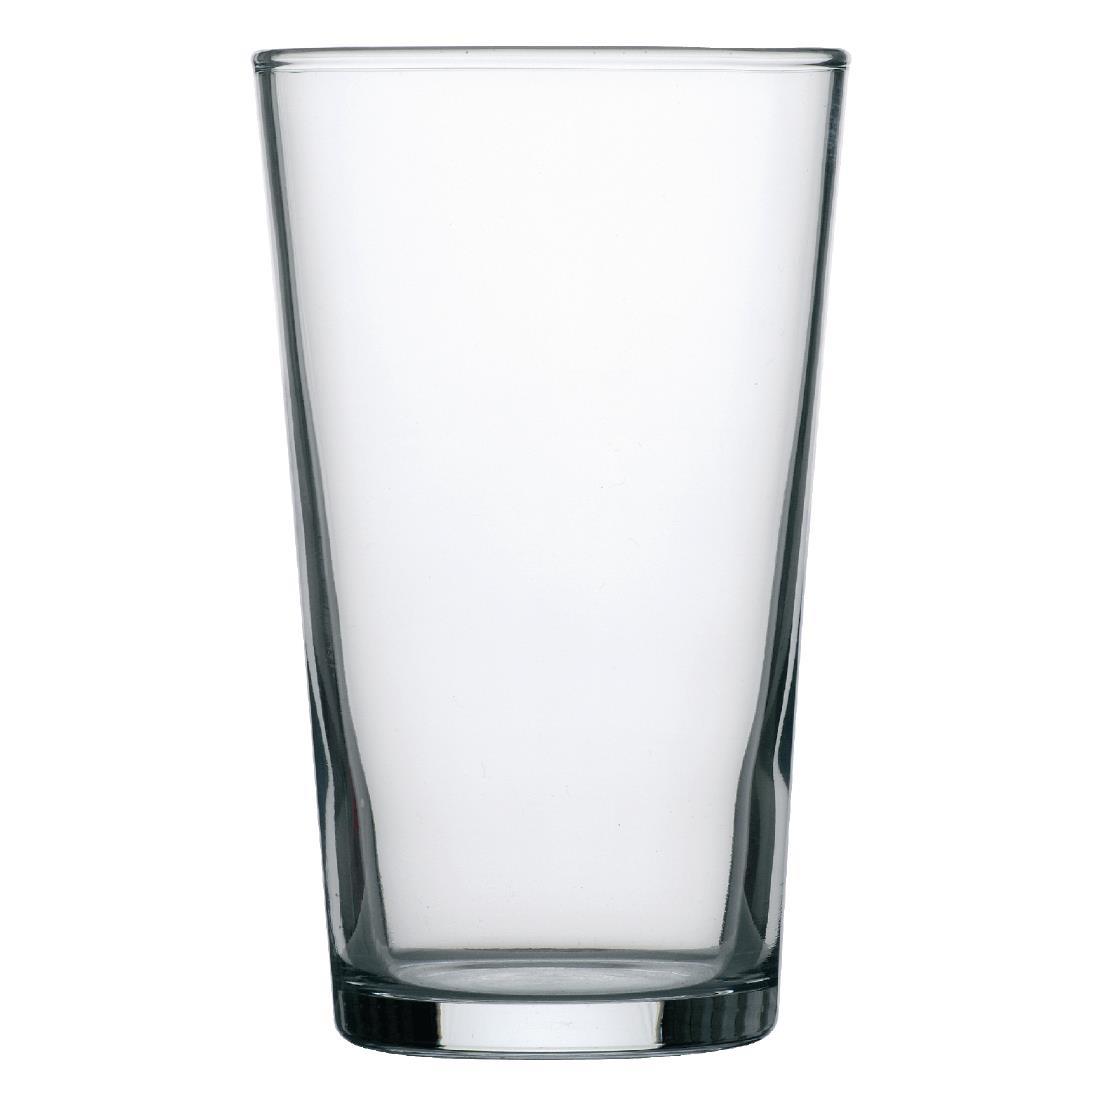 Arcoroc Beer Glasses 285ml CE Marked (Pack of 48) - Y706  - 1